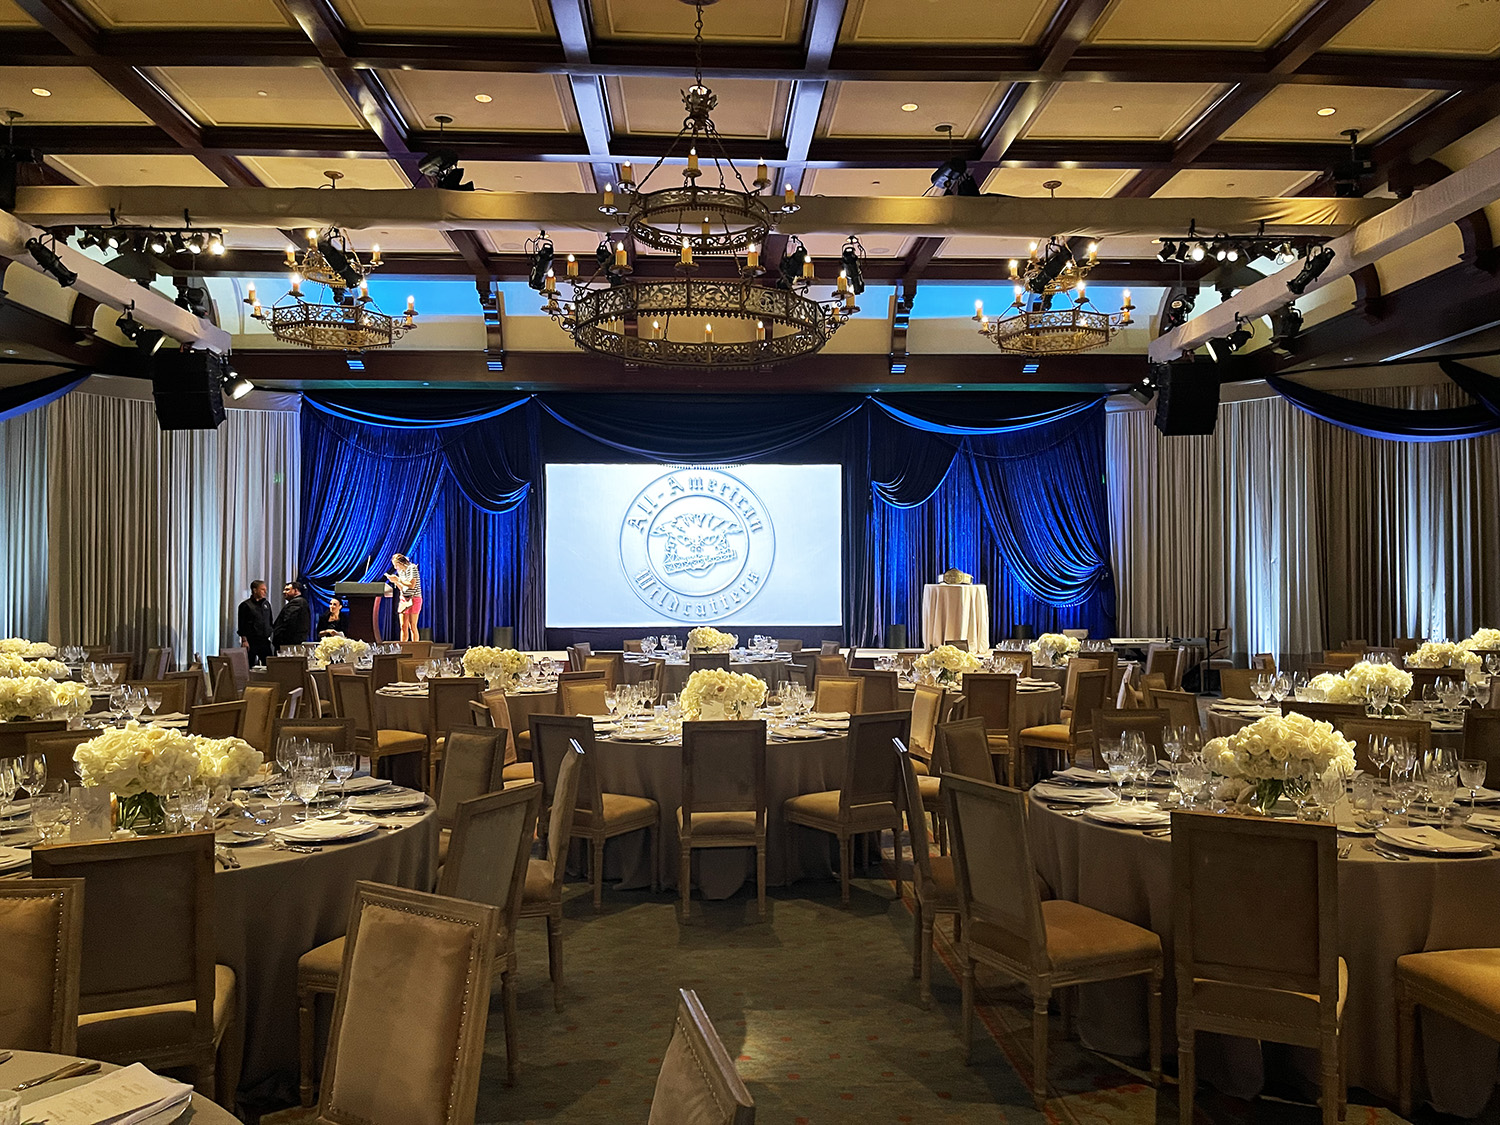 An elegant banquet hall set up for an event with round tables, floral centerpieces, a stage with a blue backdrop, and a large screen displaying an emblem.